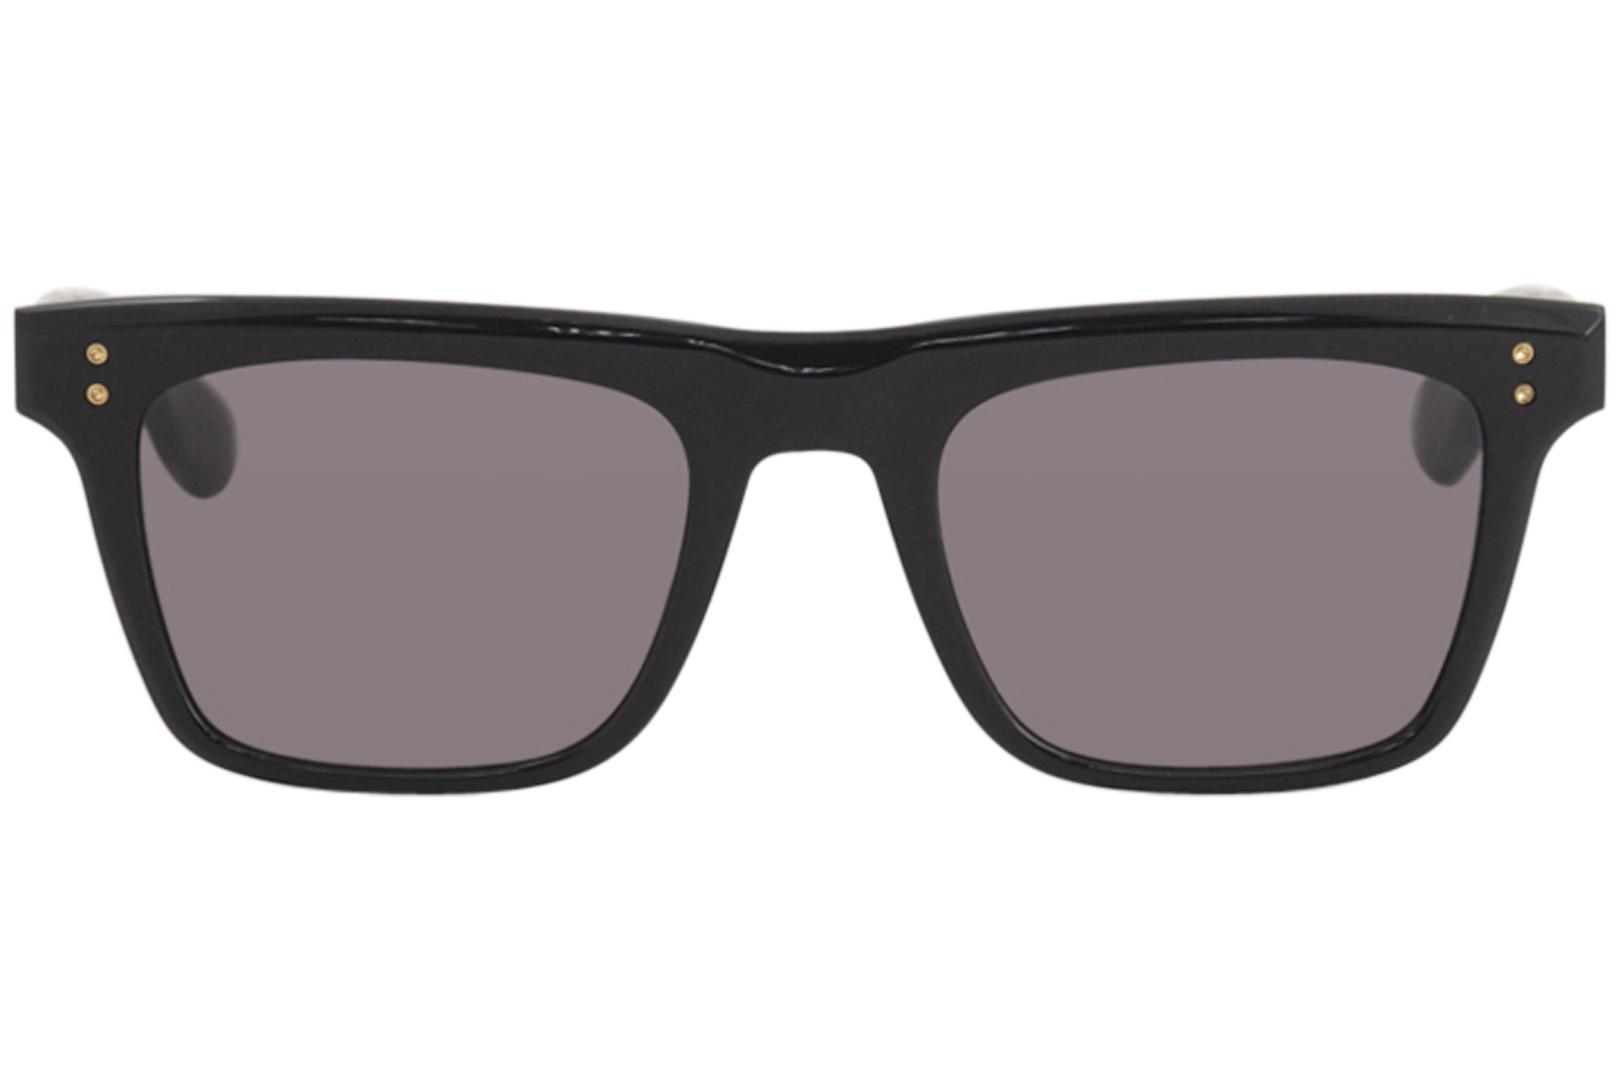 Details about   DITA TELION DTS120-51-01 Sunglasses Made in Japan 